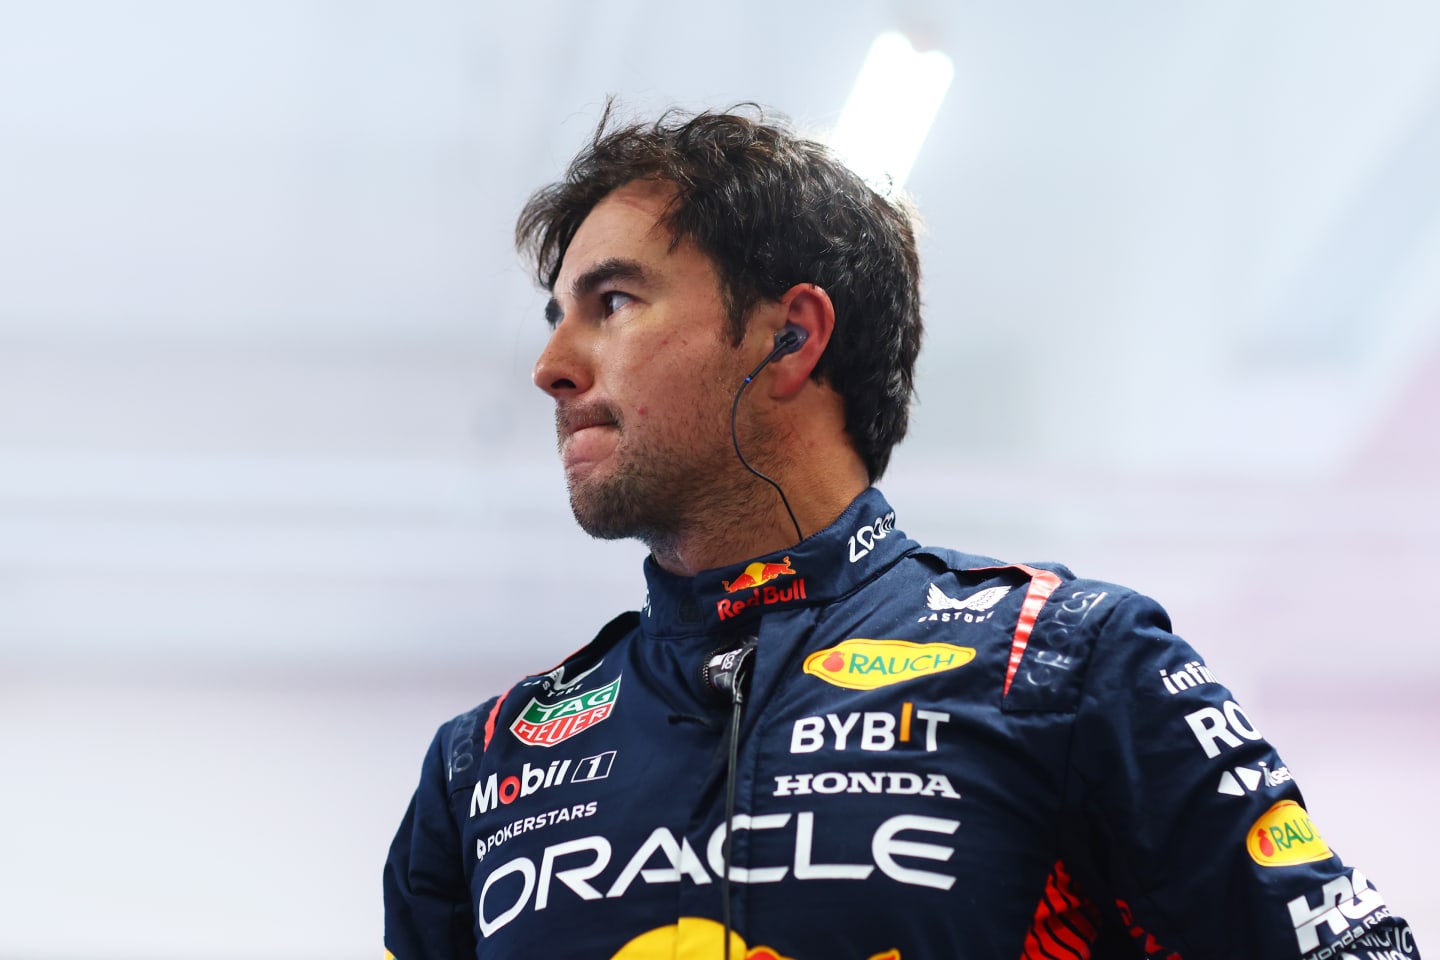 LAS VEGAS, NEVADA - NOVEMBER 18: Twelfth placed qualifier Sergio Perez of Mexico and Oracle Red Bull Racing looks on in the FIA Garage after qualifying ahead of the F1 Grand Prix of Las Vegas at Las Vegas Strip Circuit on November 18, 2023 in Las Vegas, Nevada. (Photo by Dan Istitene - Formula 1/Formula 1 via Getty Images)